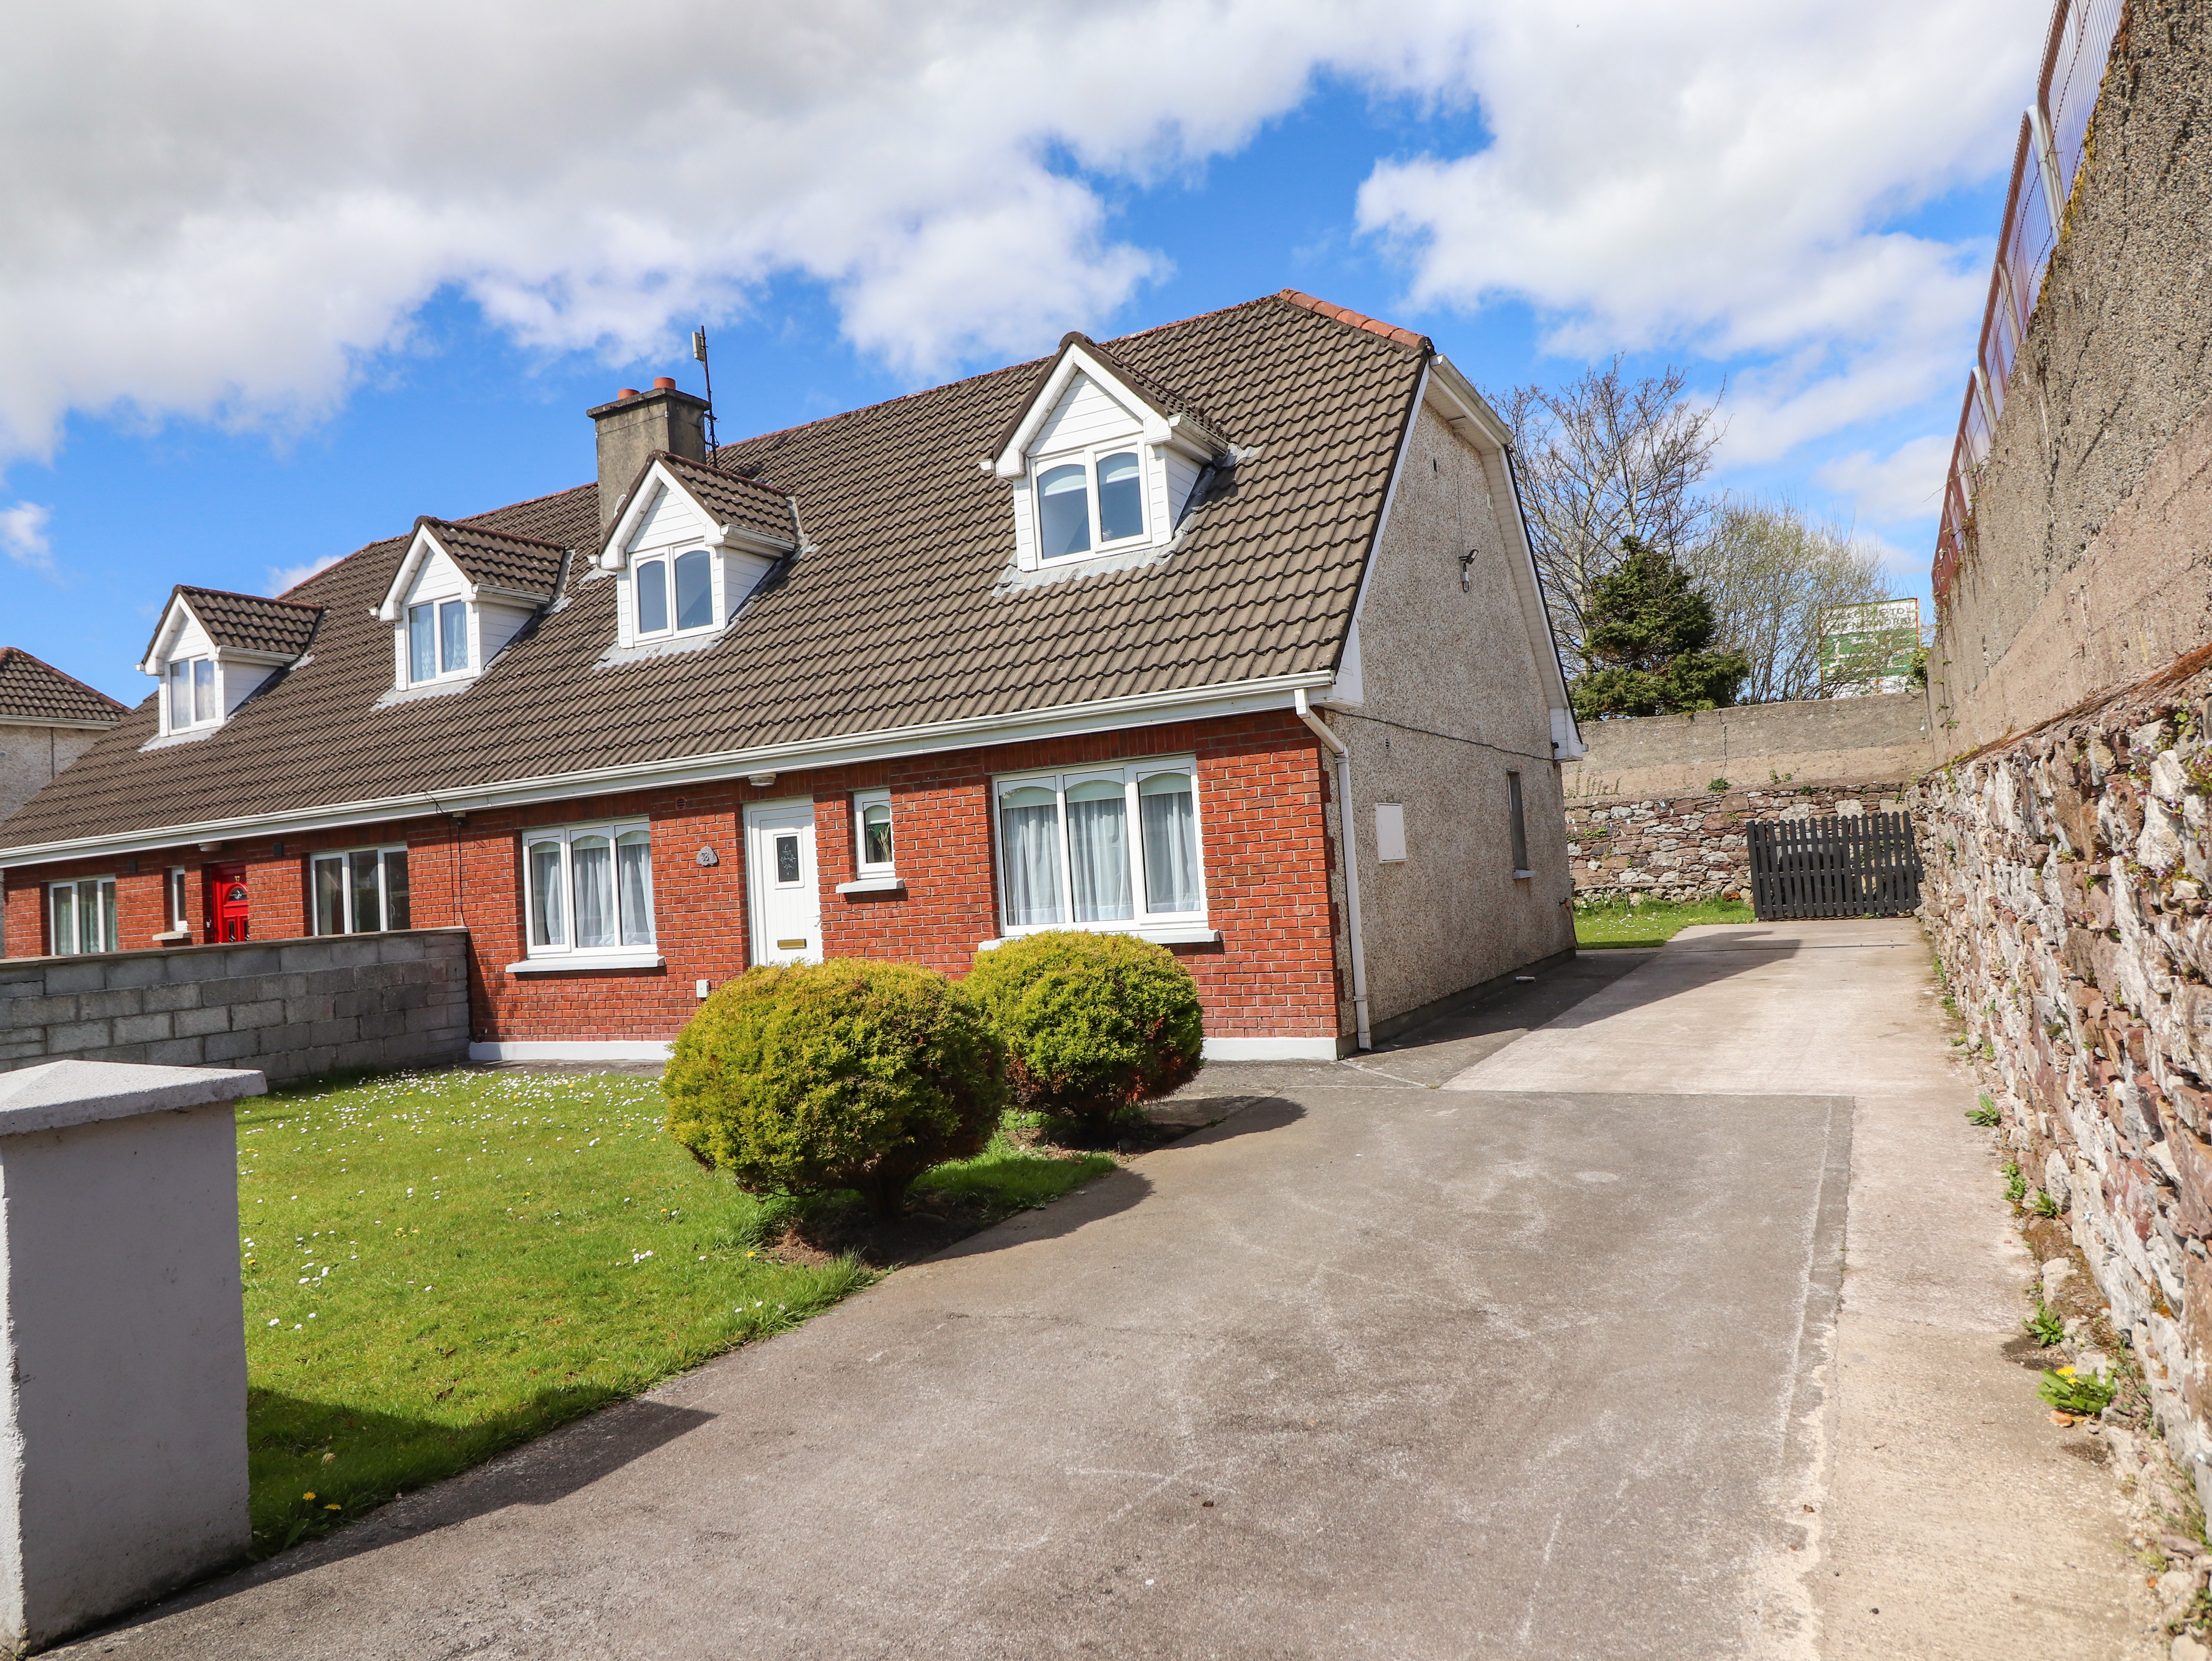 38 Castlewood Park, Tralee, county kerry